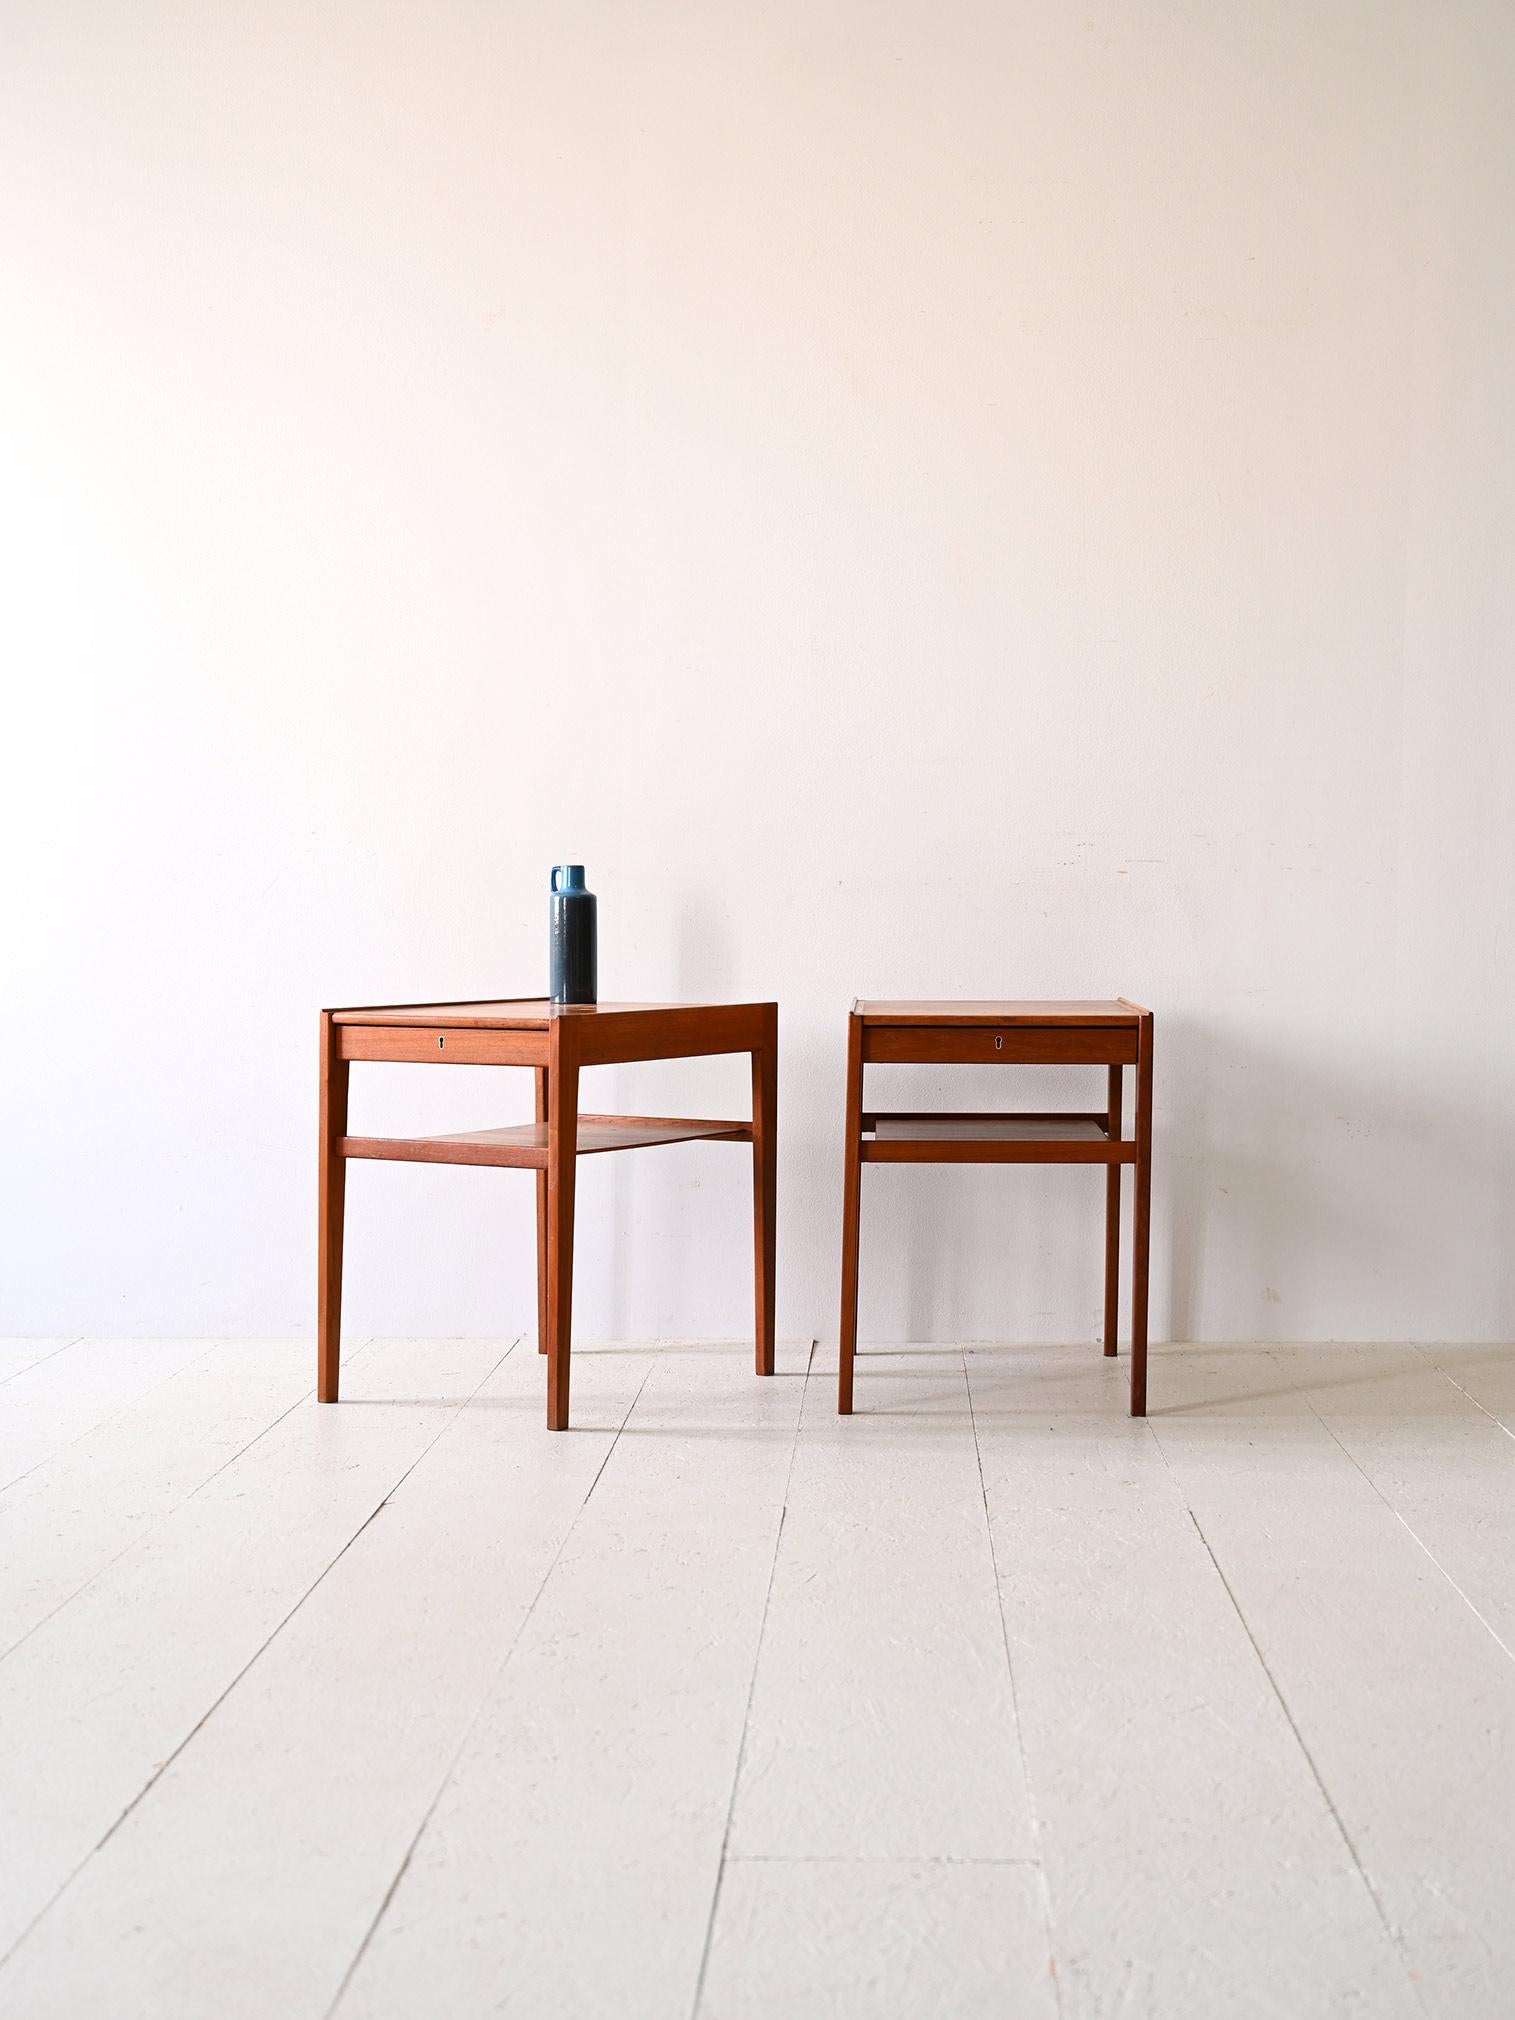 Pair of Scandinavian teak nightstands.

A pair of bedside tables that traces the essence of Scandinavian design from the 1960s. 
Made of teak wood, these nightstands feature a minimalist, cleanly styled frame with slender, square legs that give them